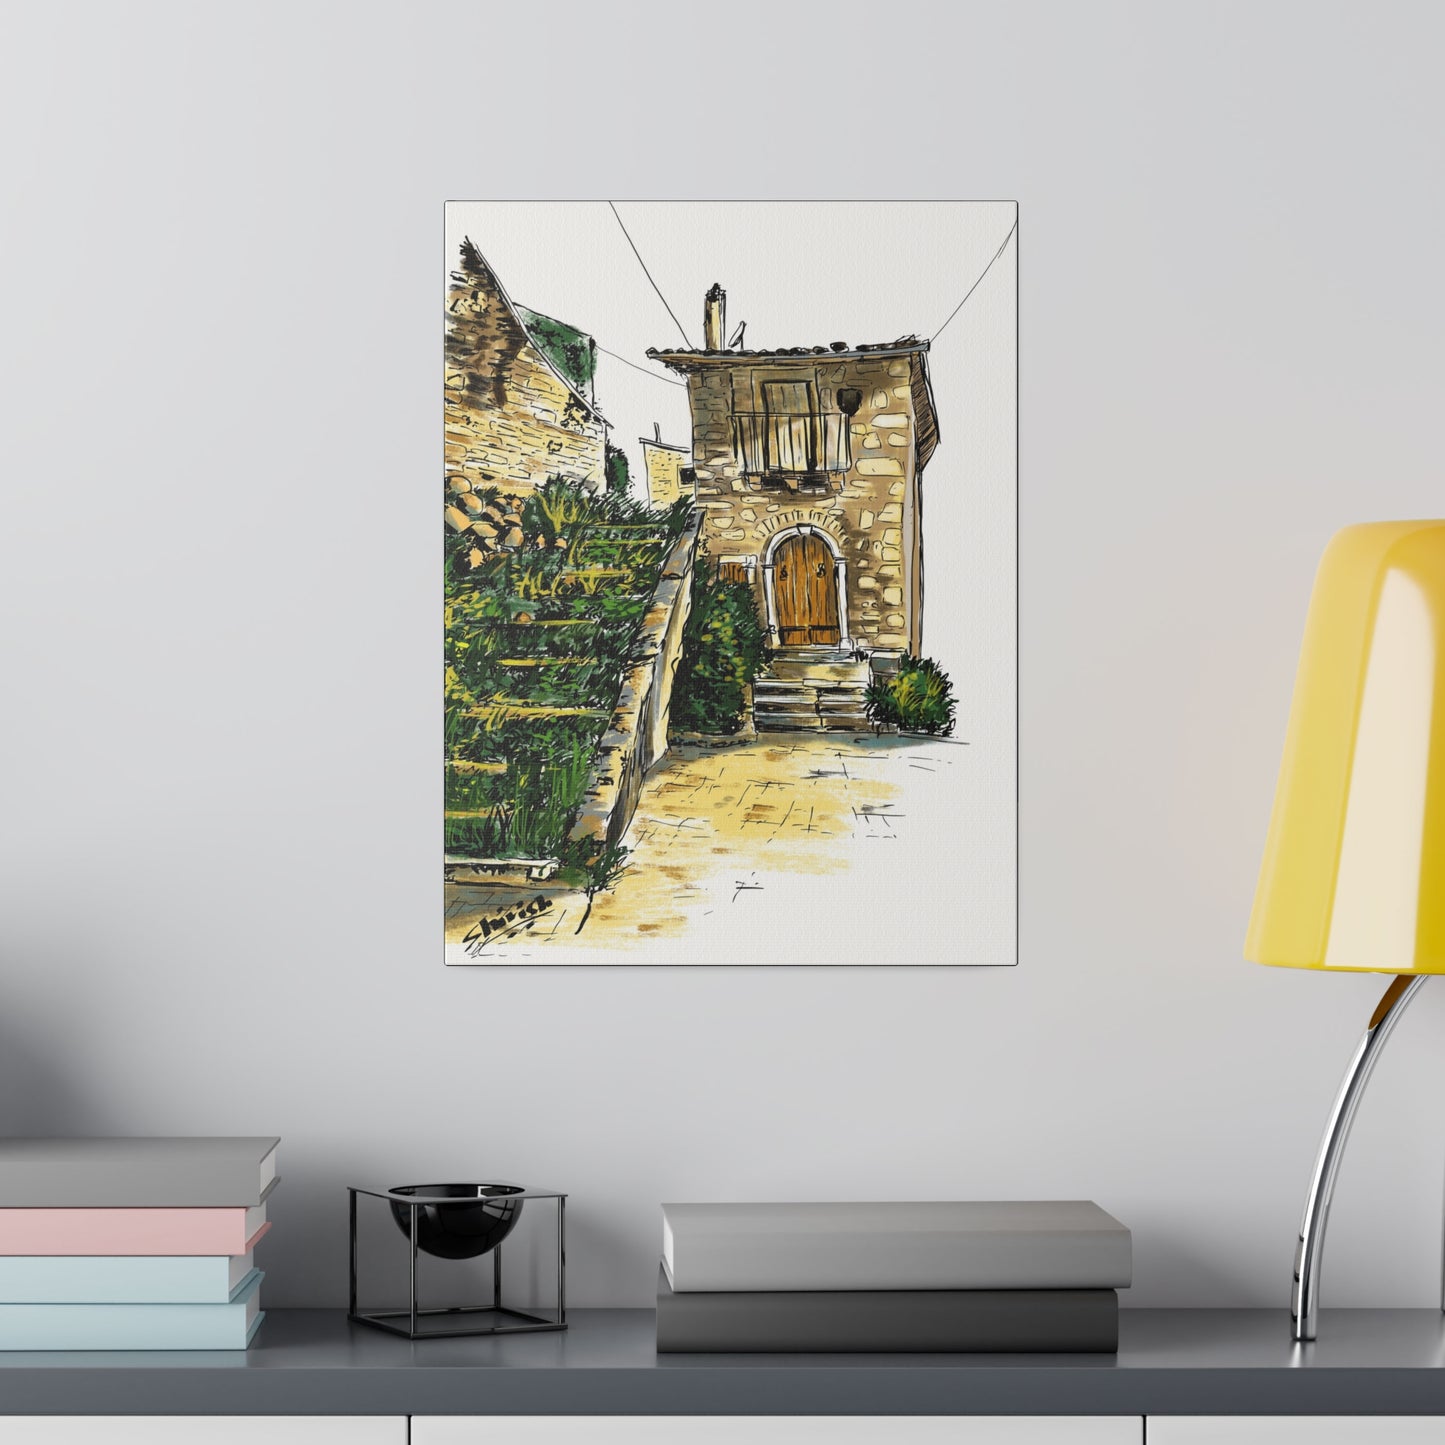 The Green Stairs in an Italian Village - Canvas Print